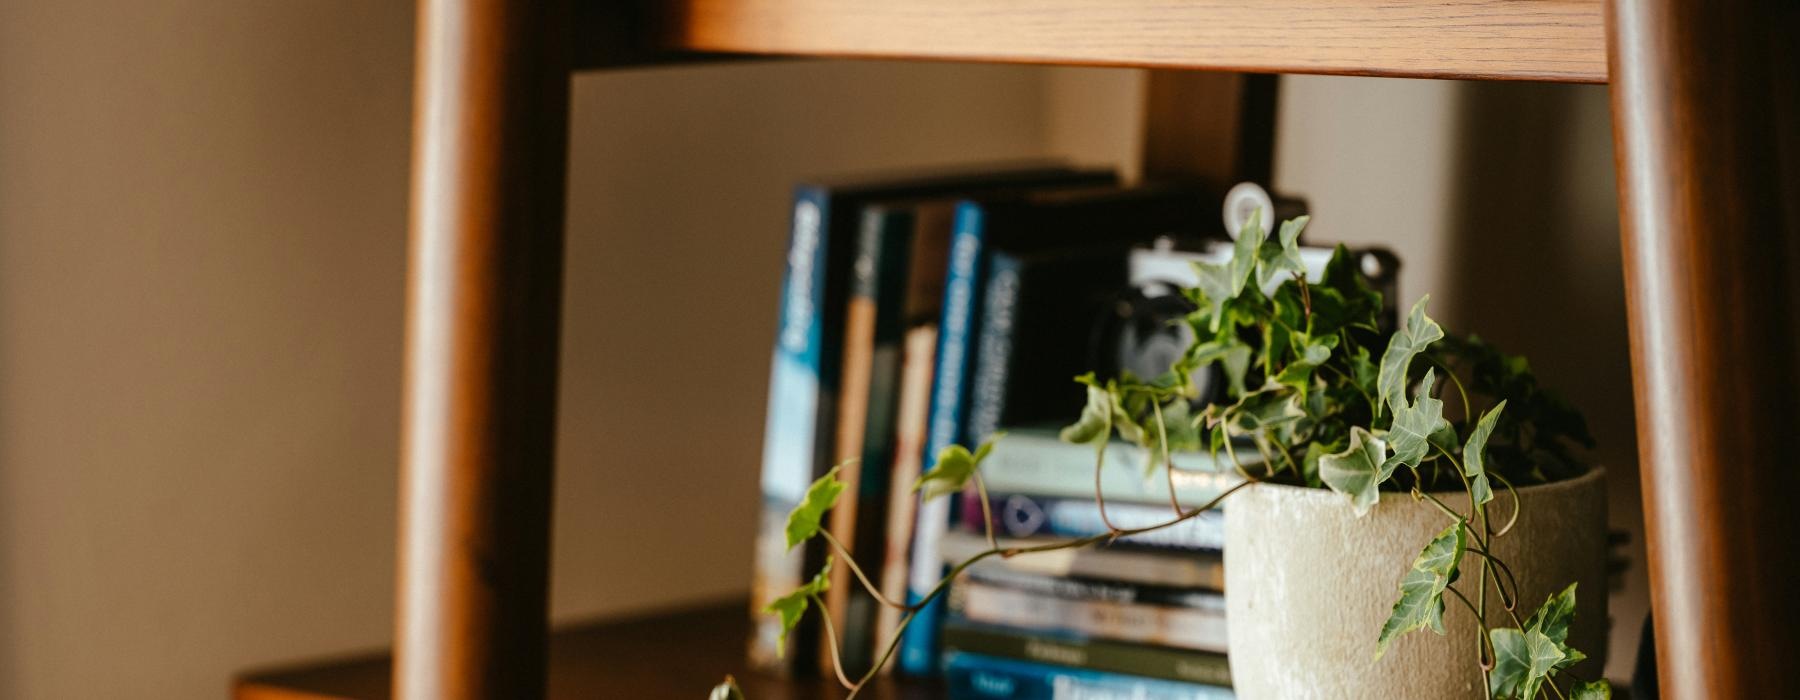 a shelf with a plant and books on it